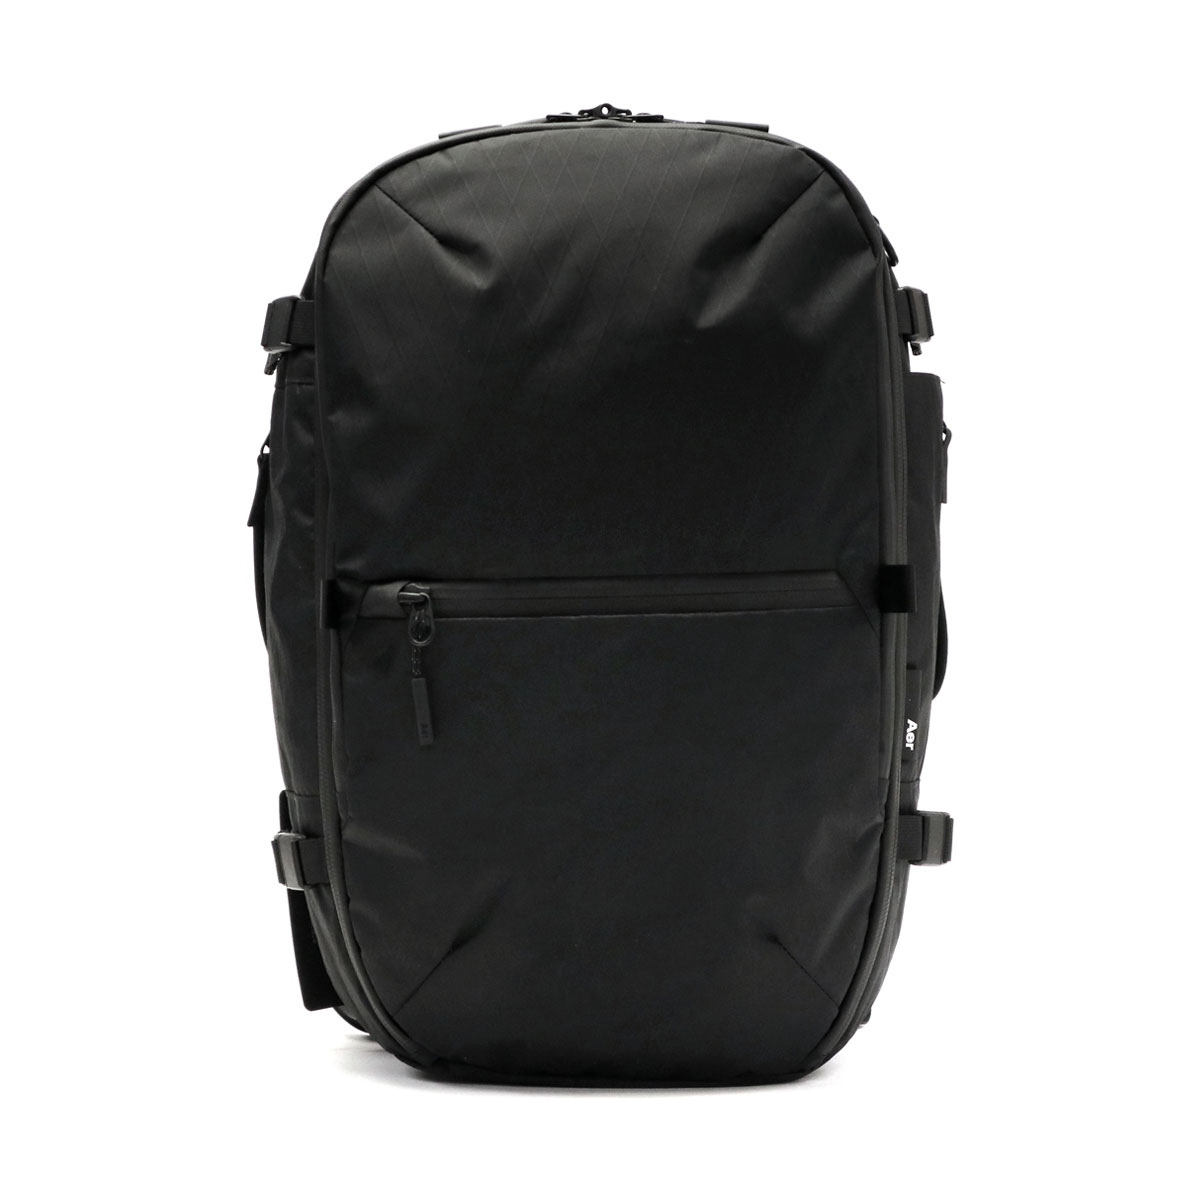 Aer エアー Travel Collection Travel Pack 3 X-Pac バックパック 35L